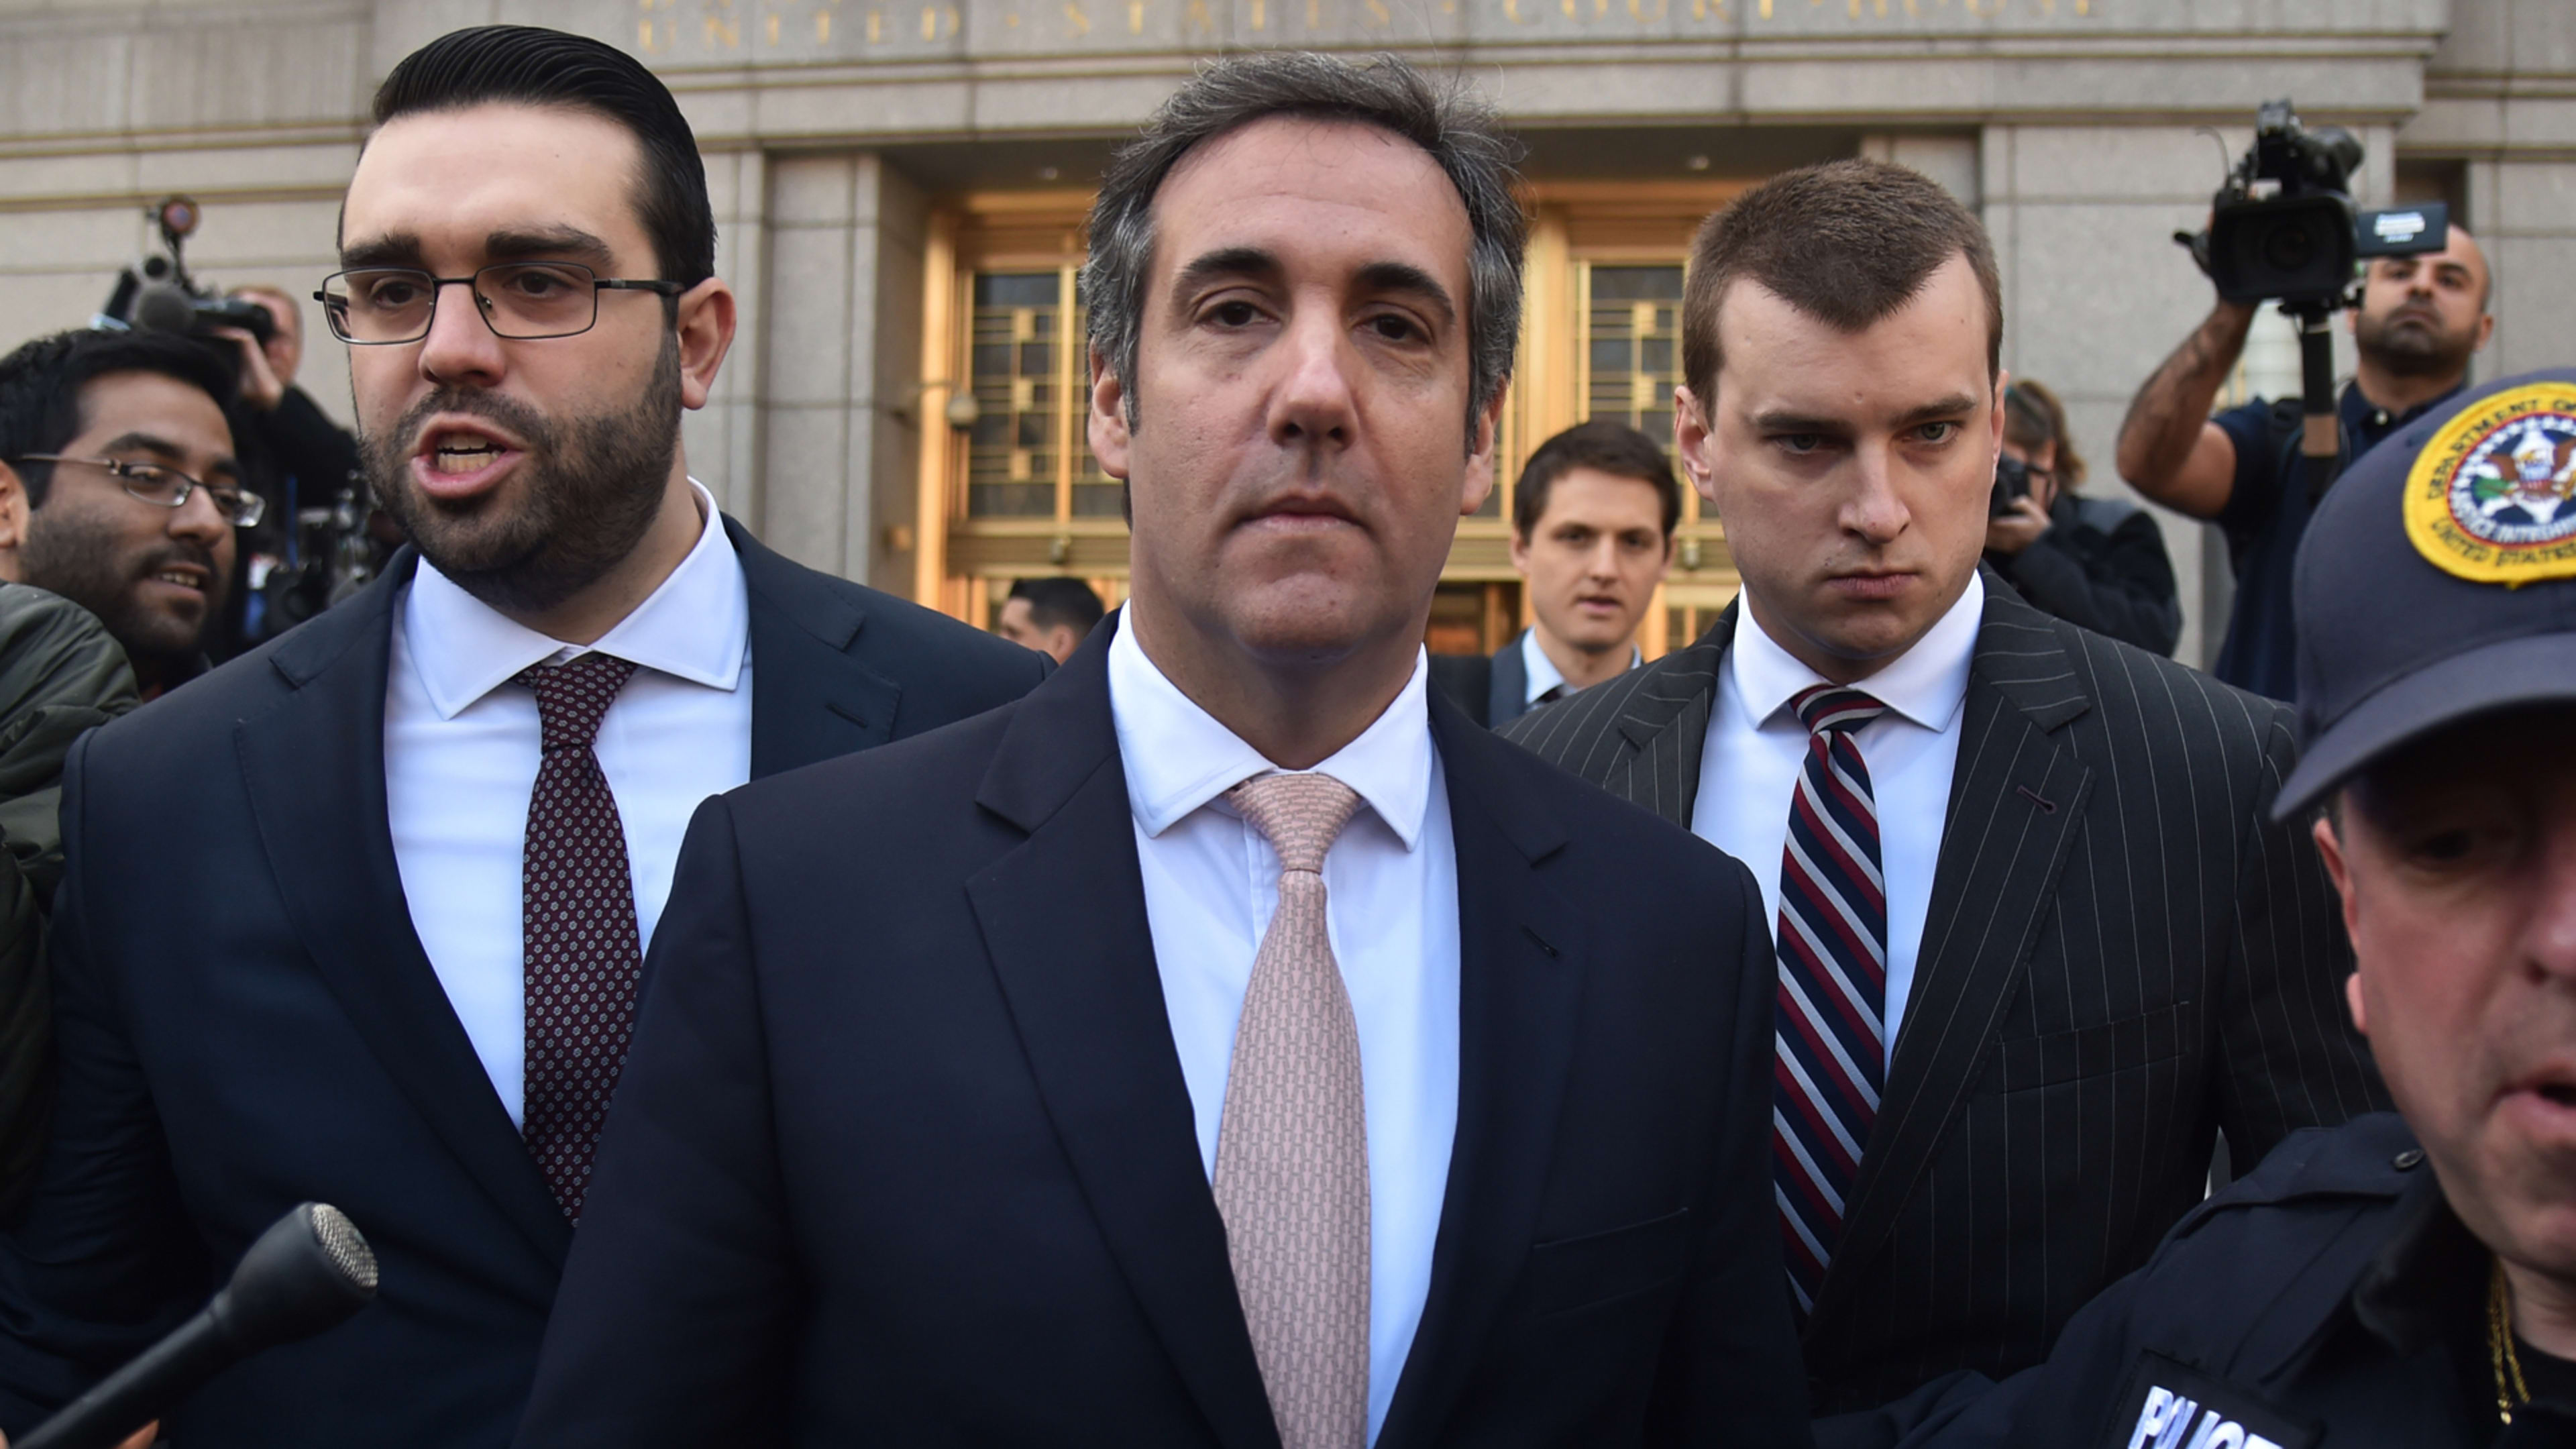 Stormy Daniels’s lawyer: Michael Cohen may have used Russian oligarch’s money